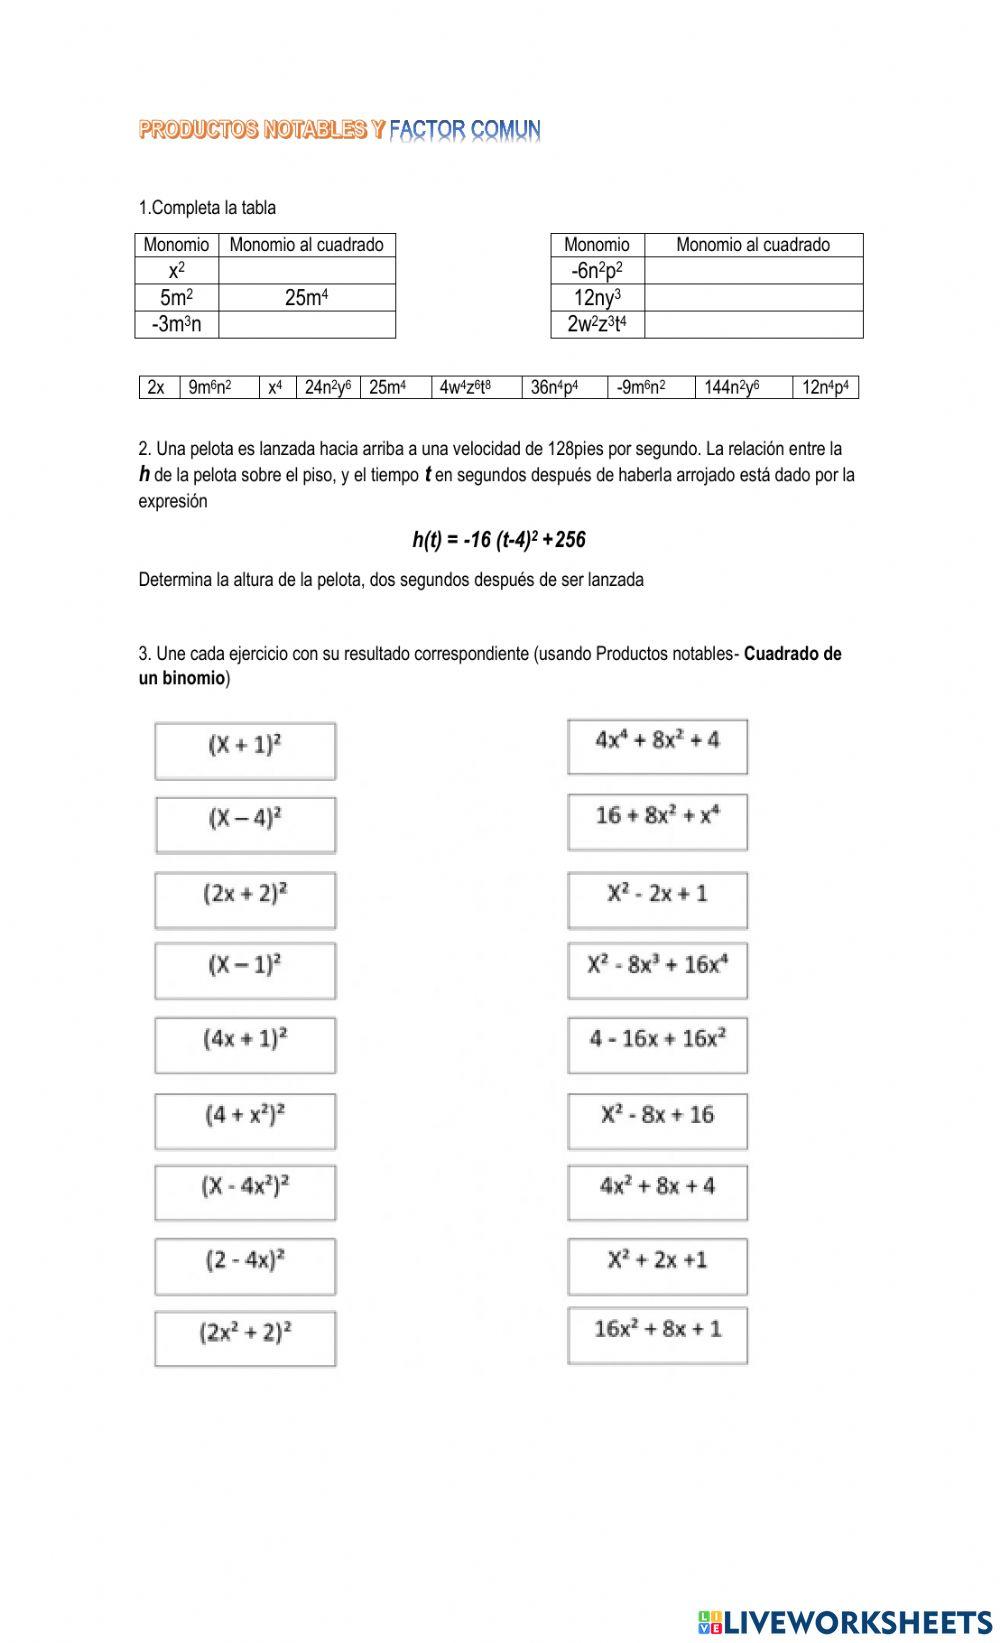 PRODUCTOS NOTABLES Y FACTOR COMUN online exercise for | Live Worksheets